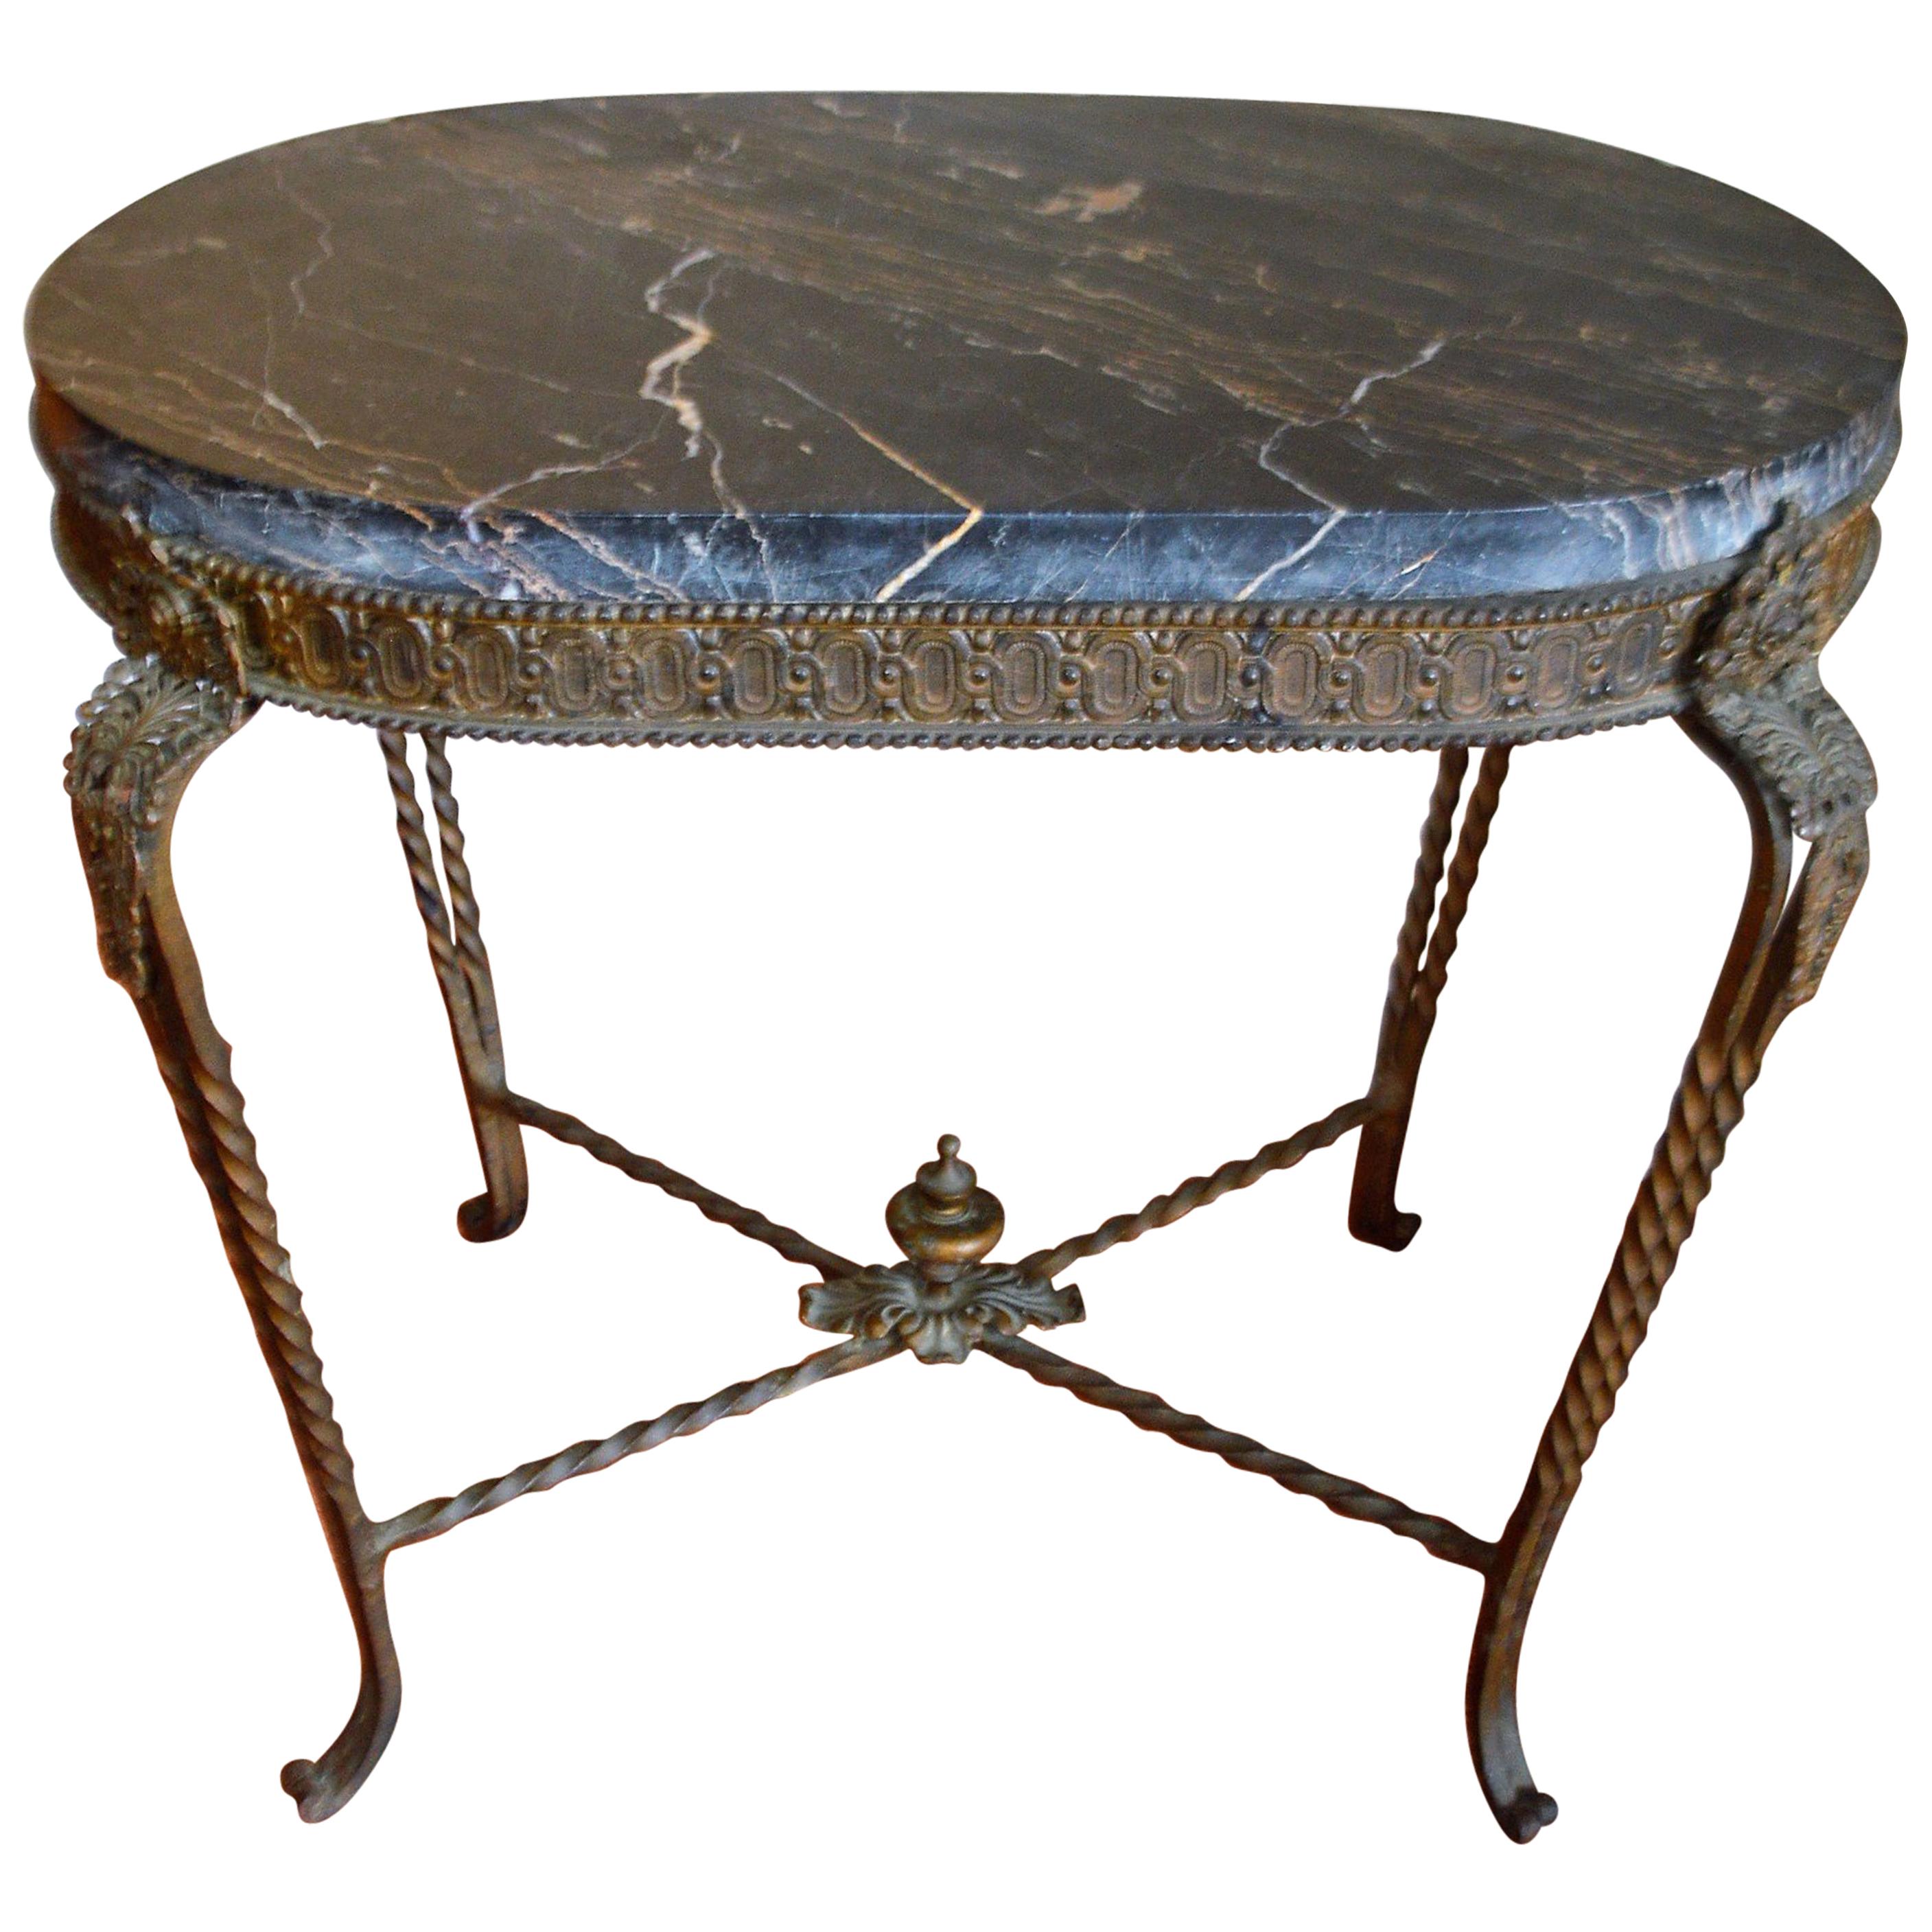 French Style Rustic Wrought Iron Oval Garden Side Table, Thick Black Marble Top For Sale